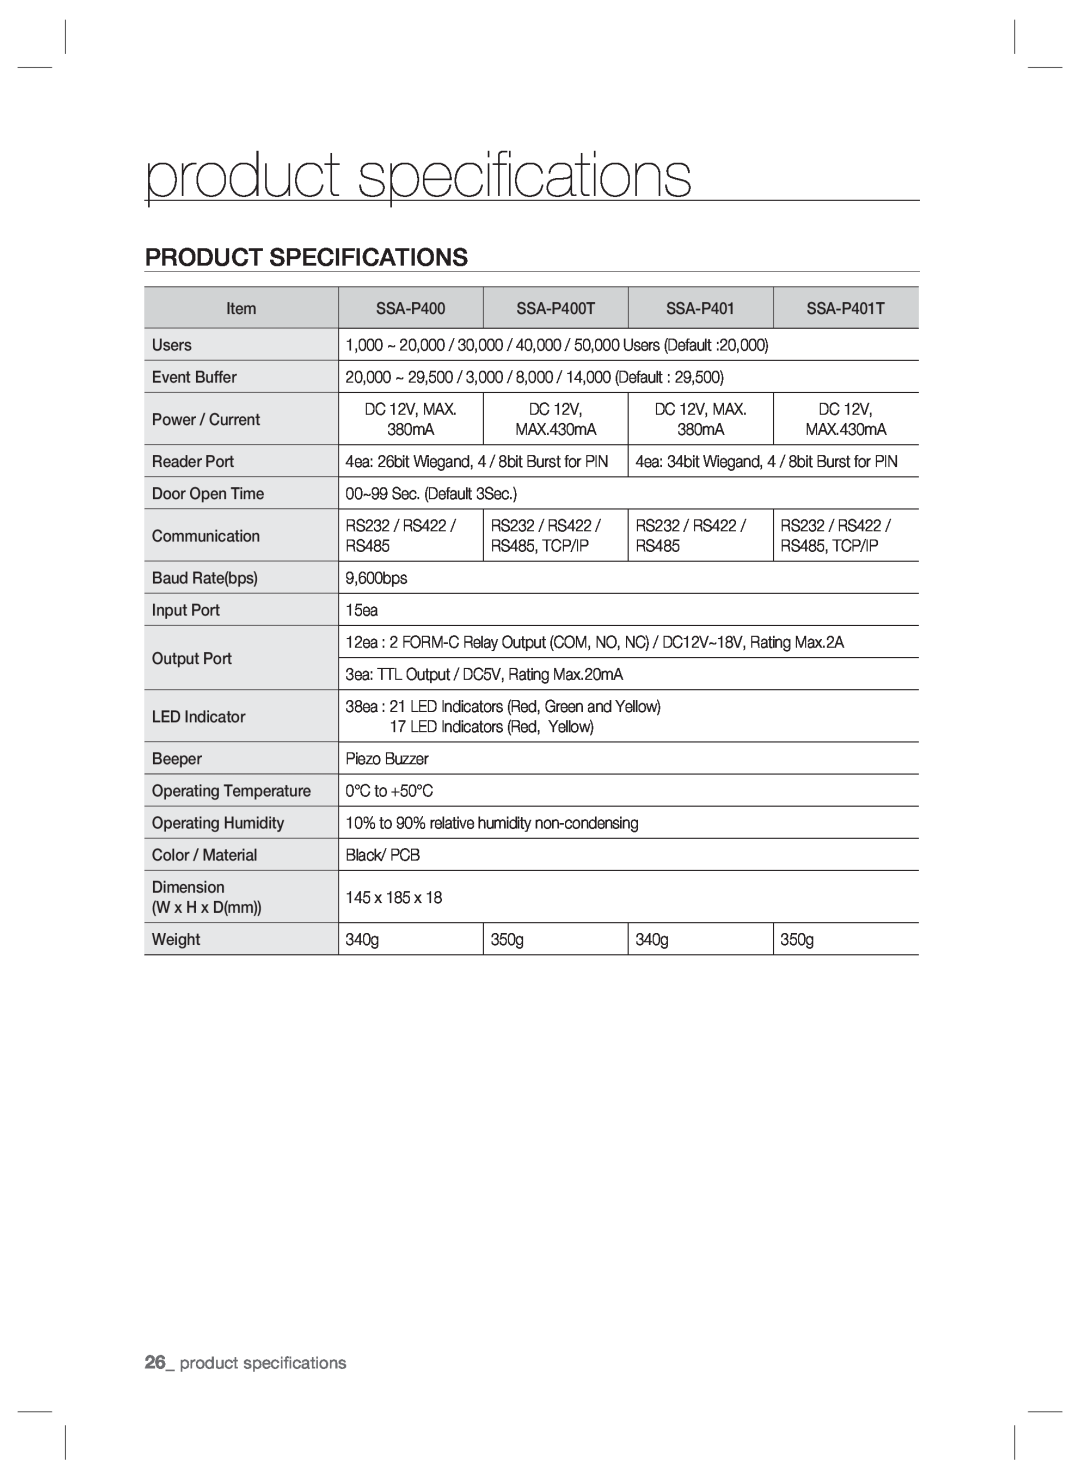 Samsung SSA-P400T, SSA-P401T user manual product speciﬁcations, Product Specifications 